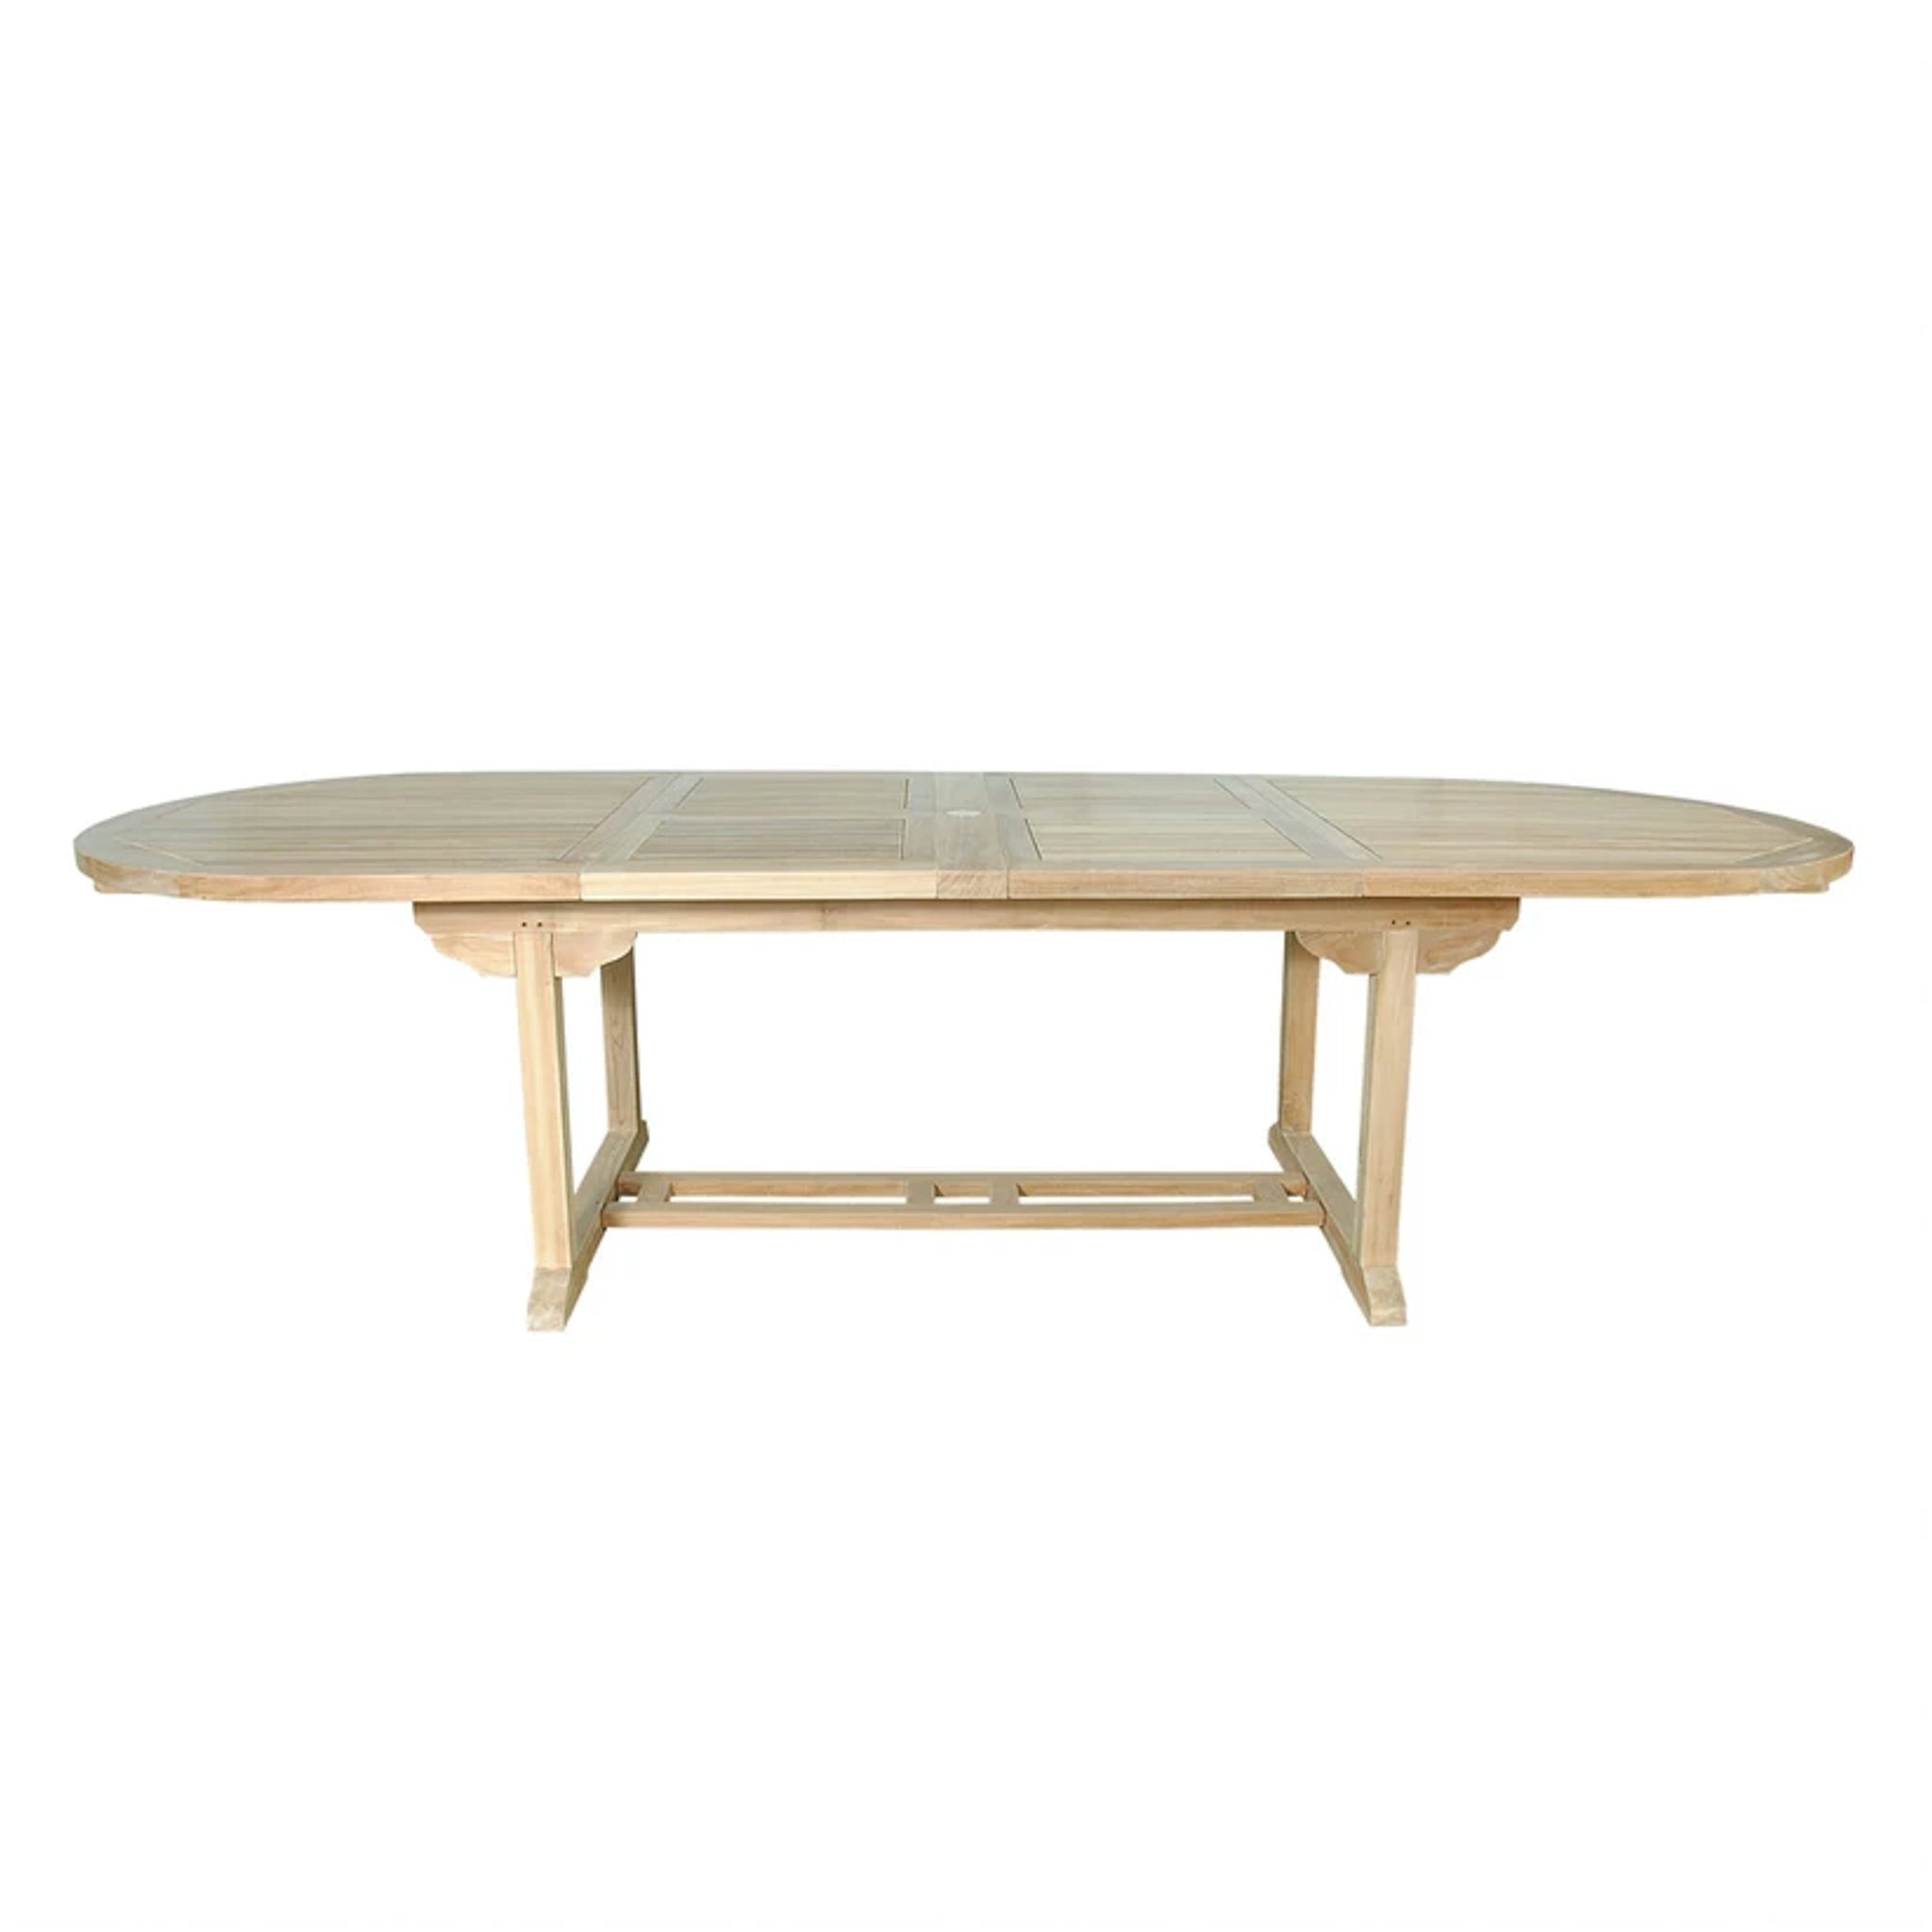 Anderson Teak Bahama 117" Oval Extension Table w/ Double Extensions TBX-117VD